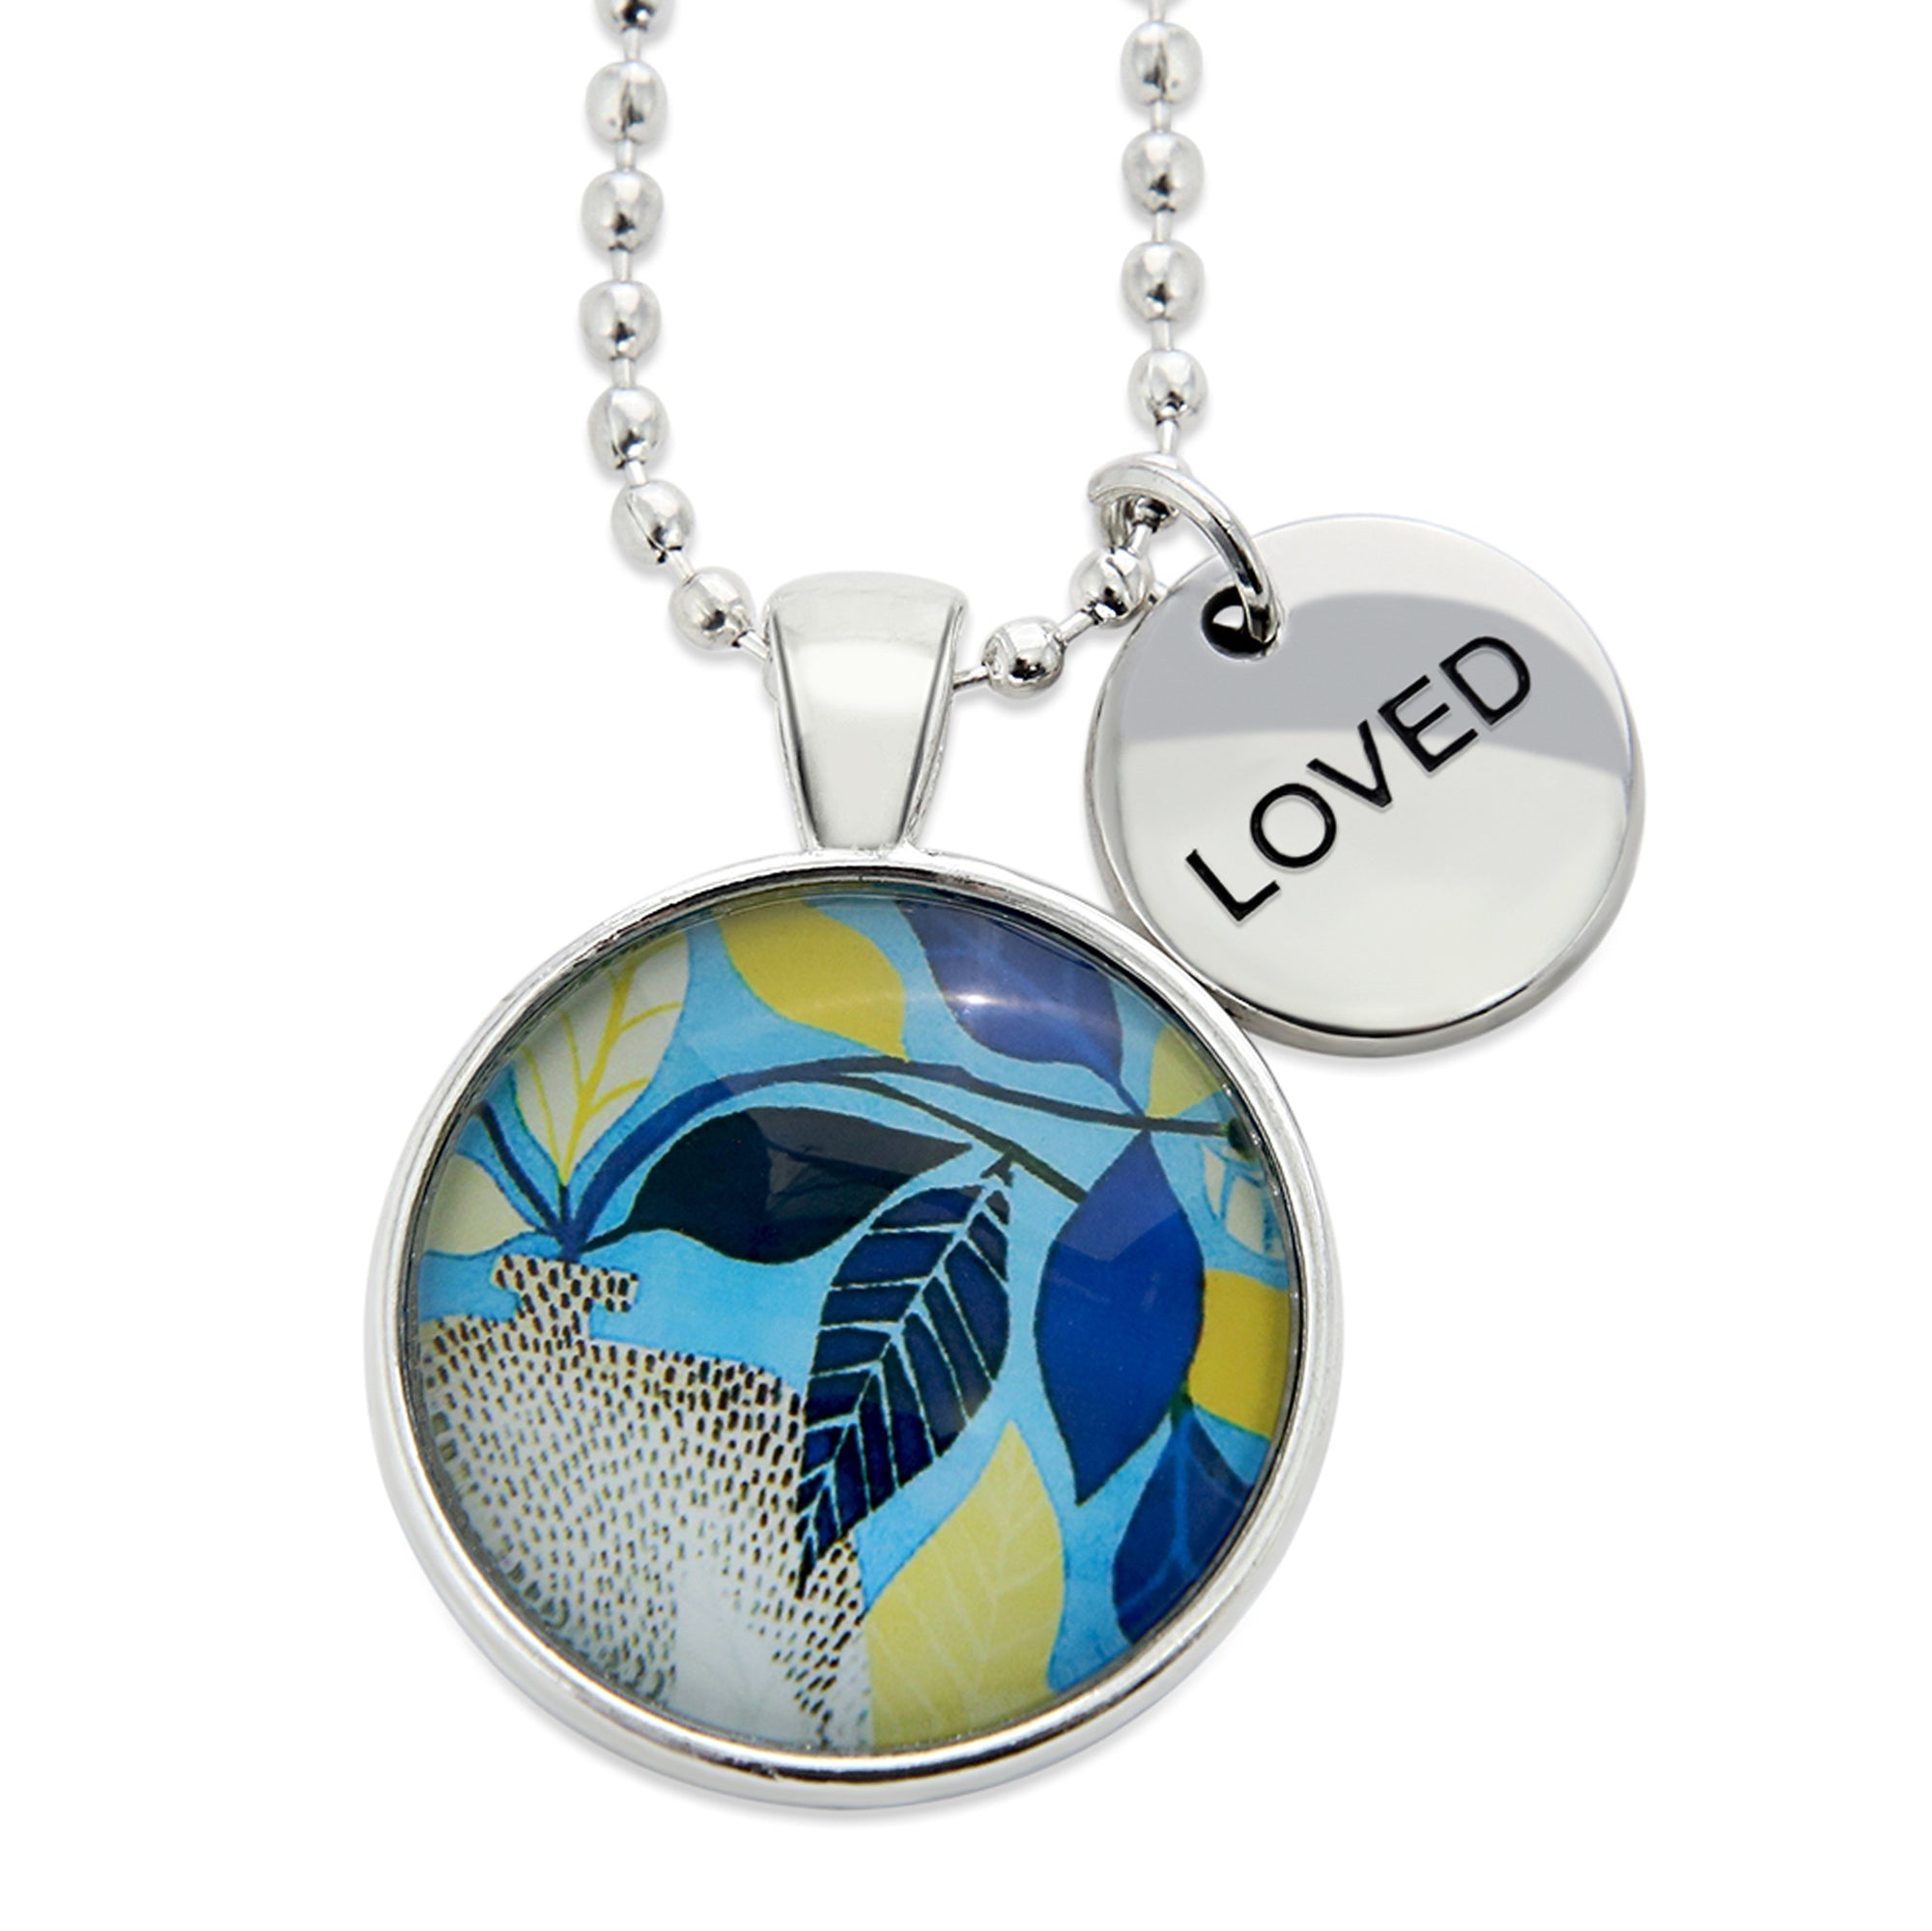 Blue Collection - Bright Silver 'LOVED' Necklace - Dolce (10713)